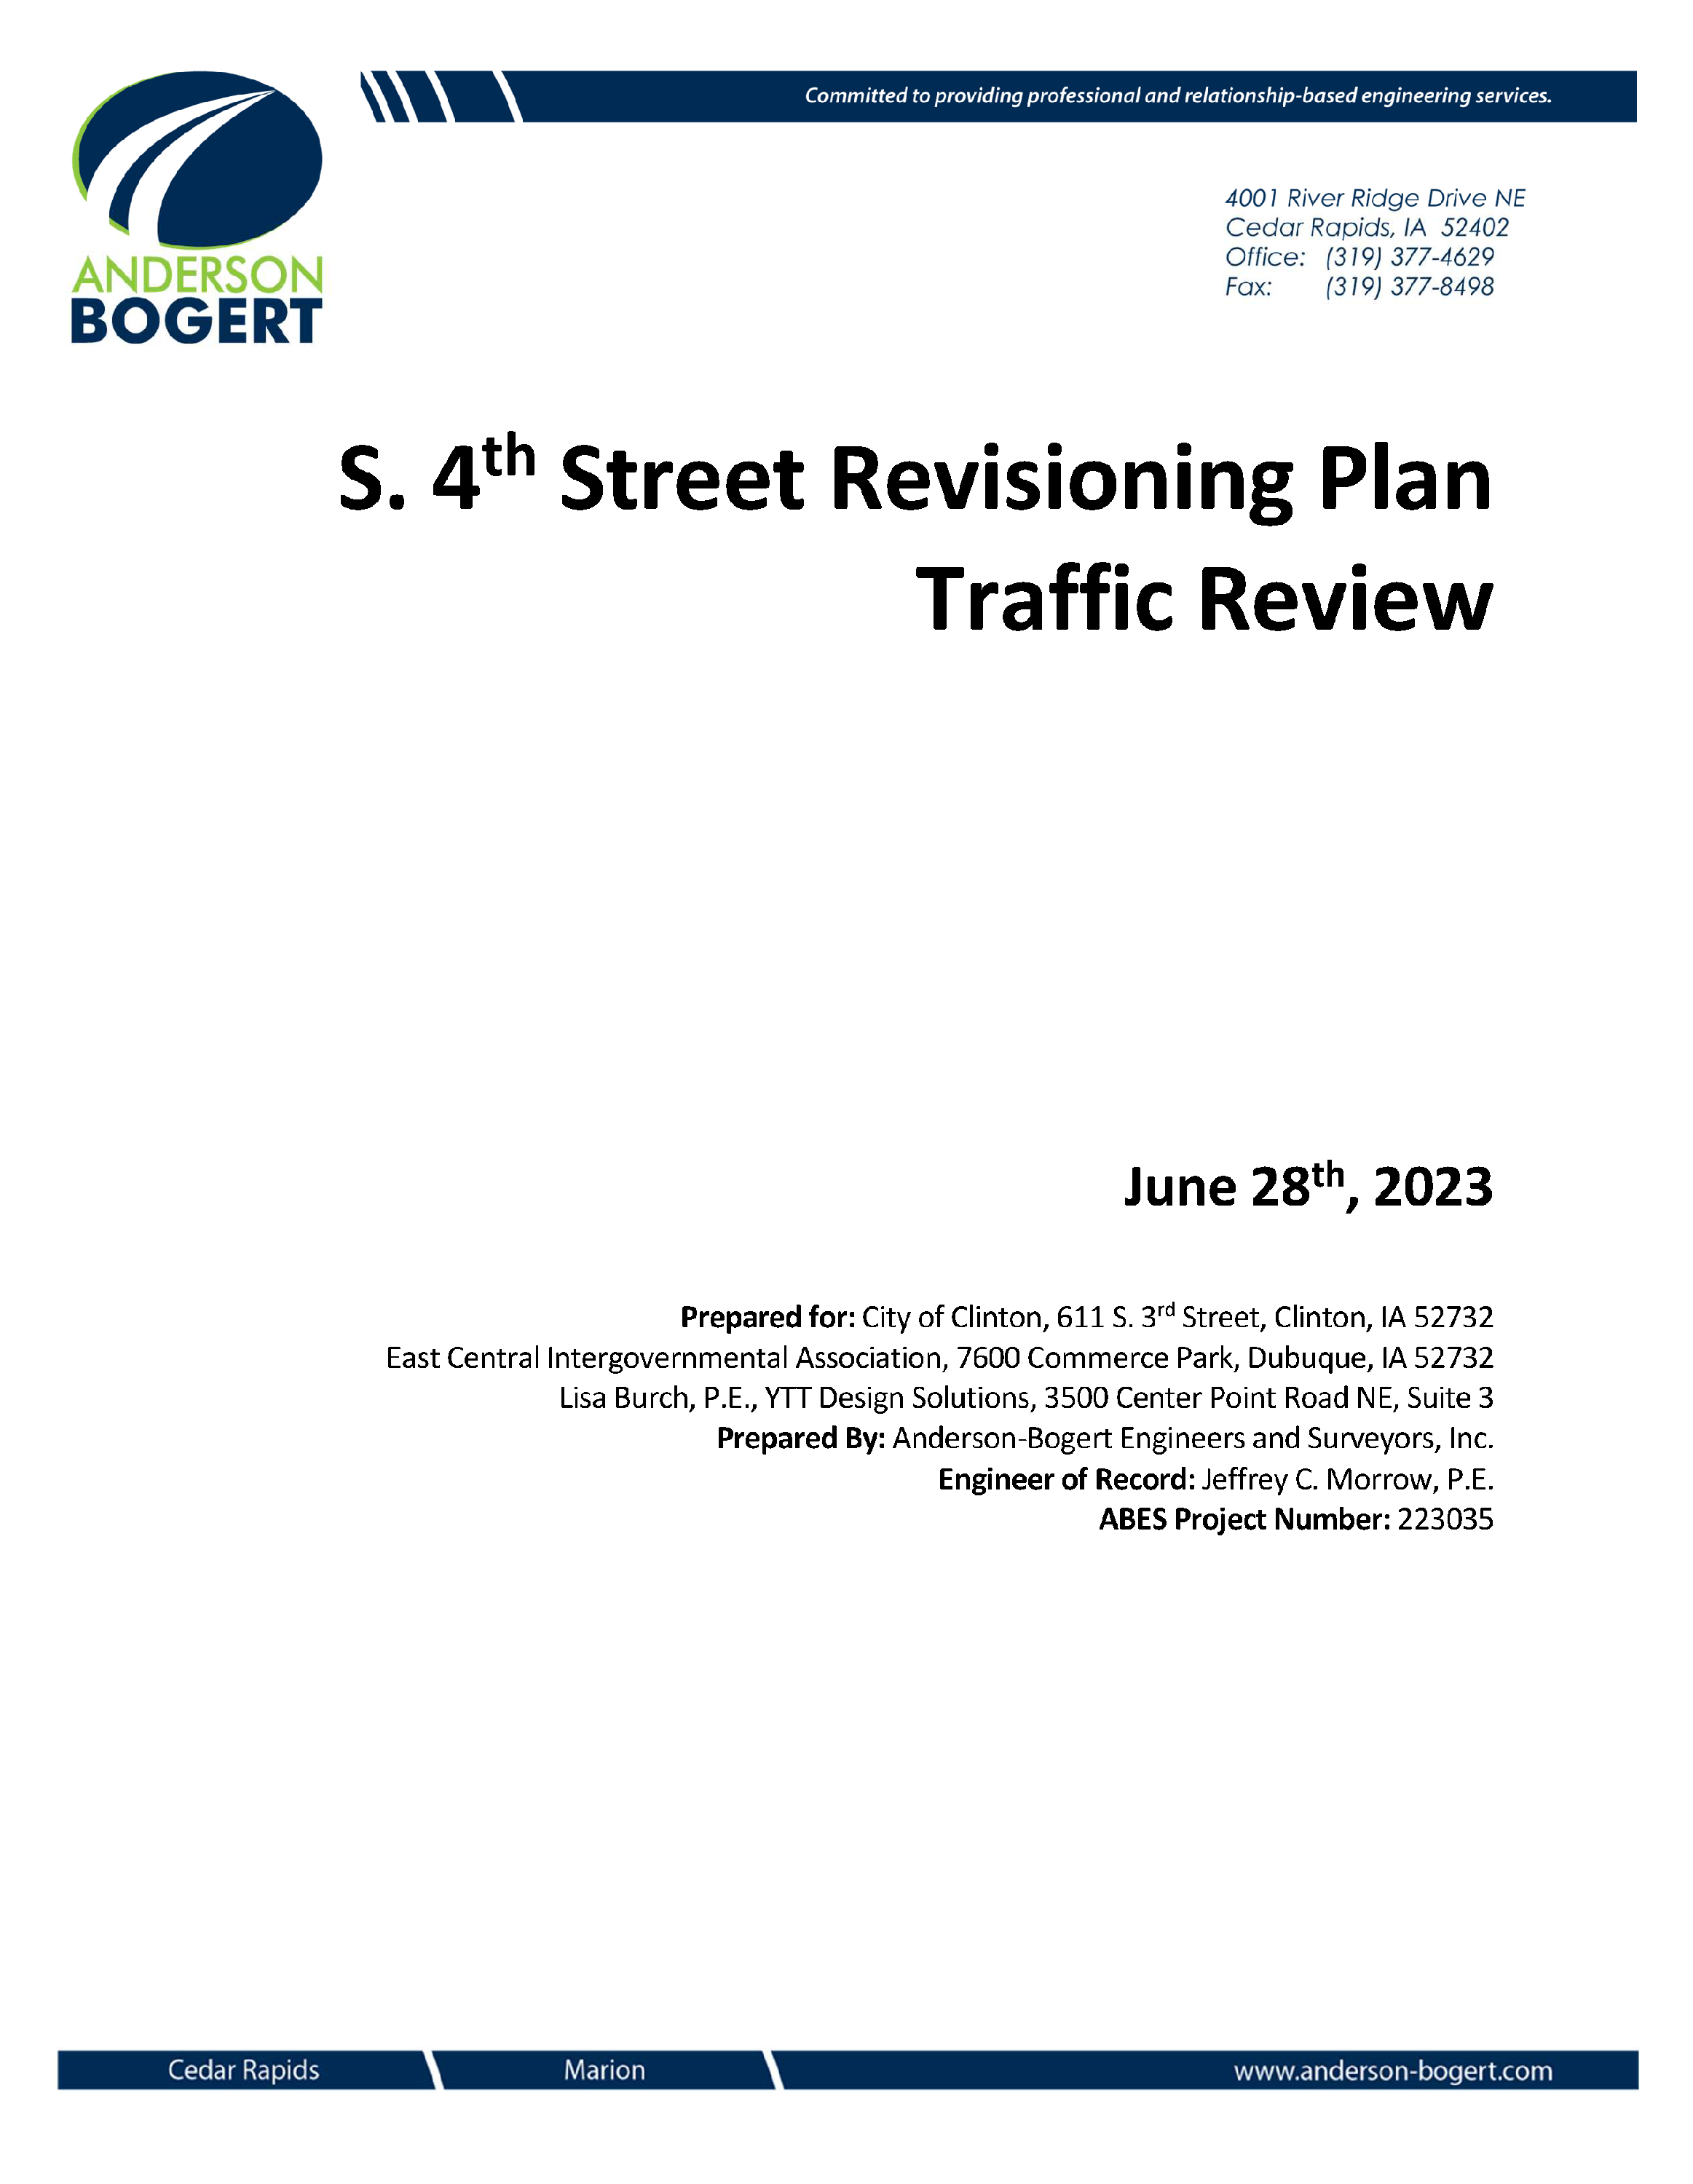 S 4th St Traffic Review Cover Page